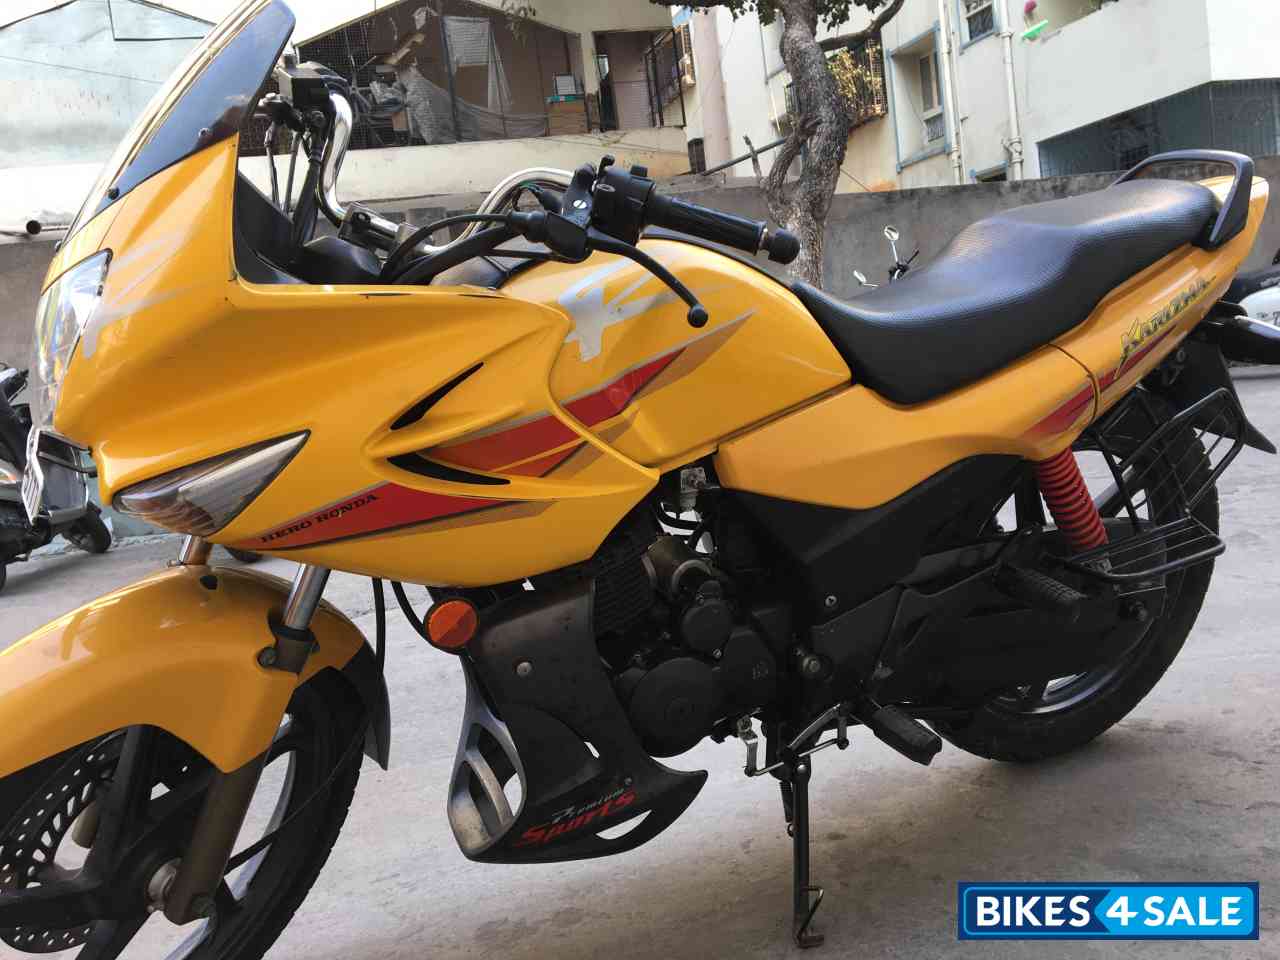 Used 11 Model Hero Karizma R For Sale In Hyderabad Id Yellow Colour Bikes4sale